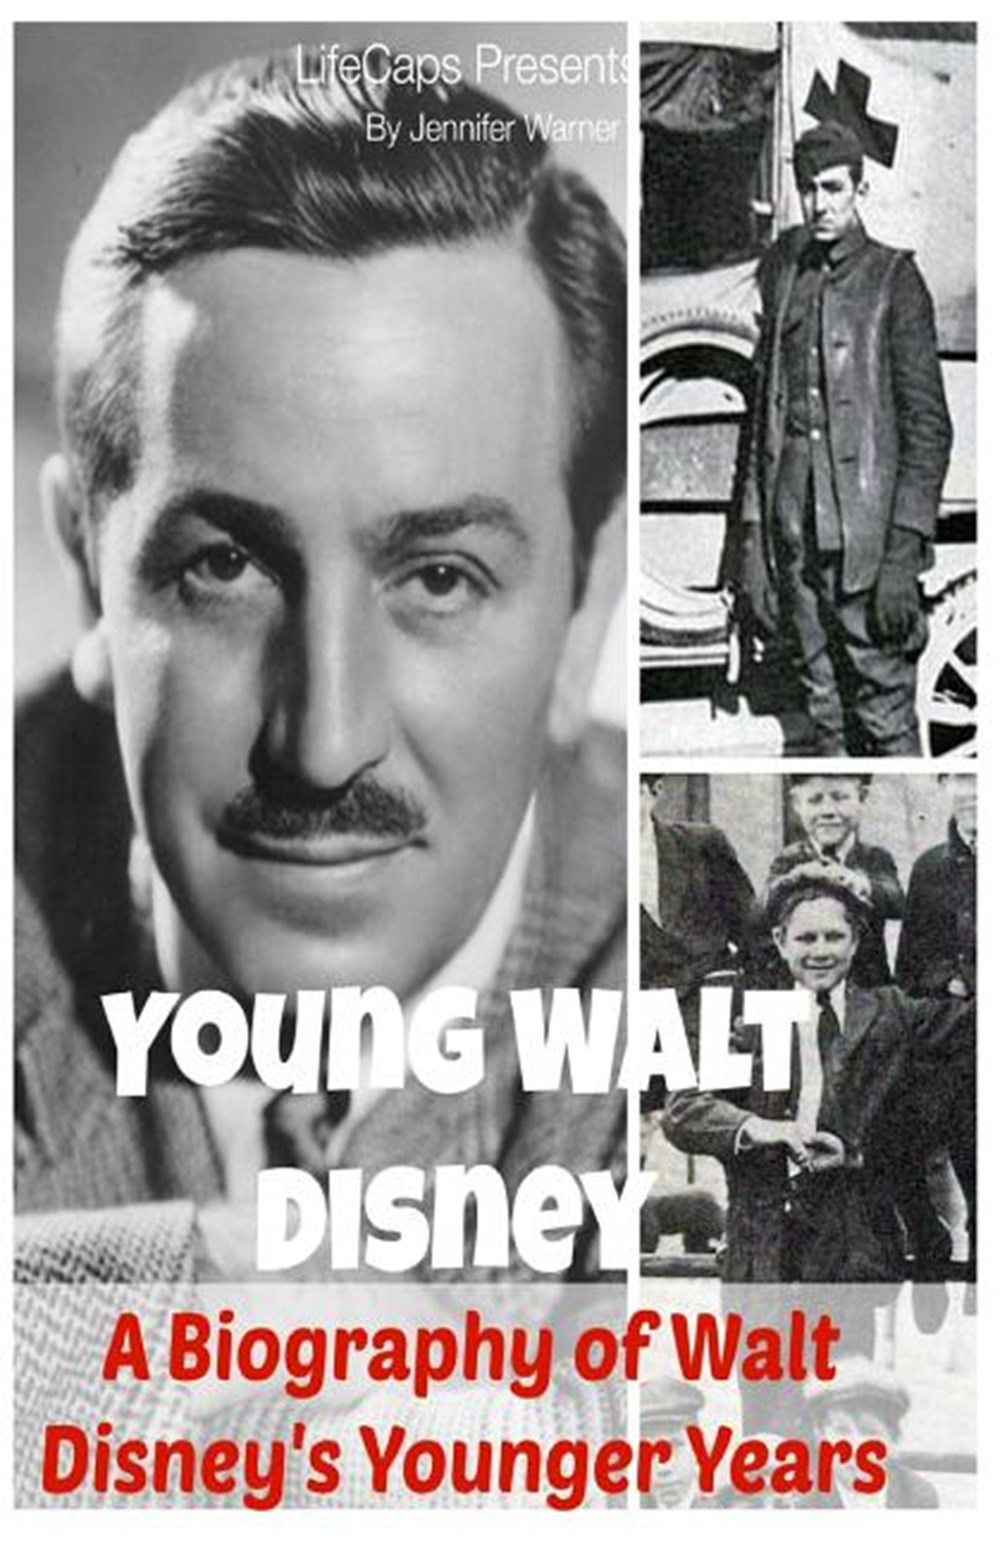 Young Walt Disney A Biography of Walt Disney's Younger Years